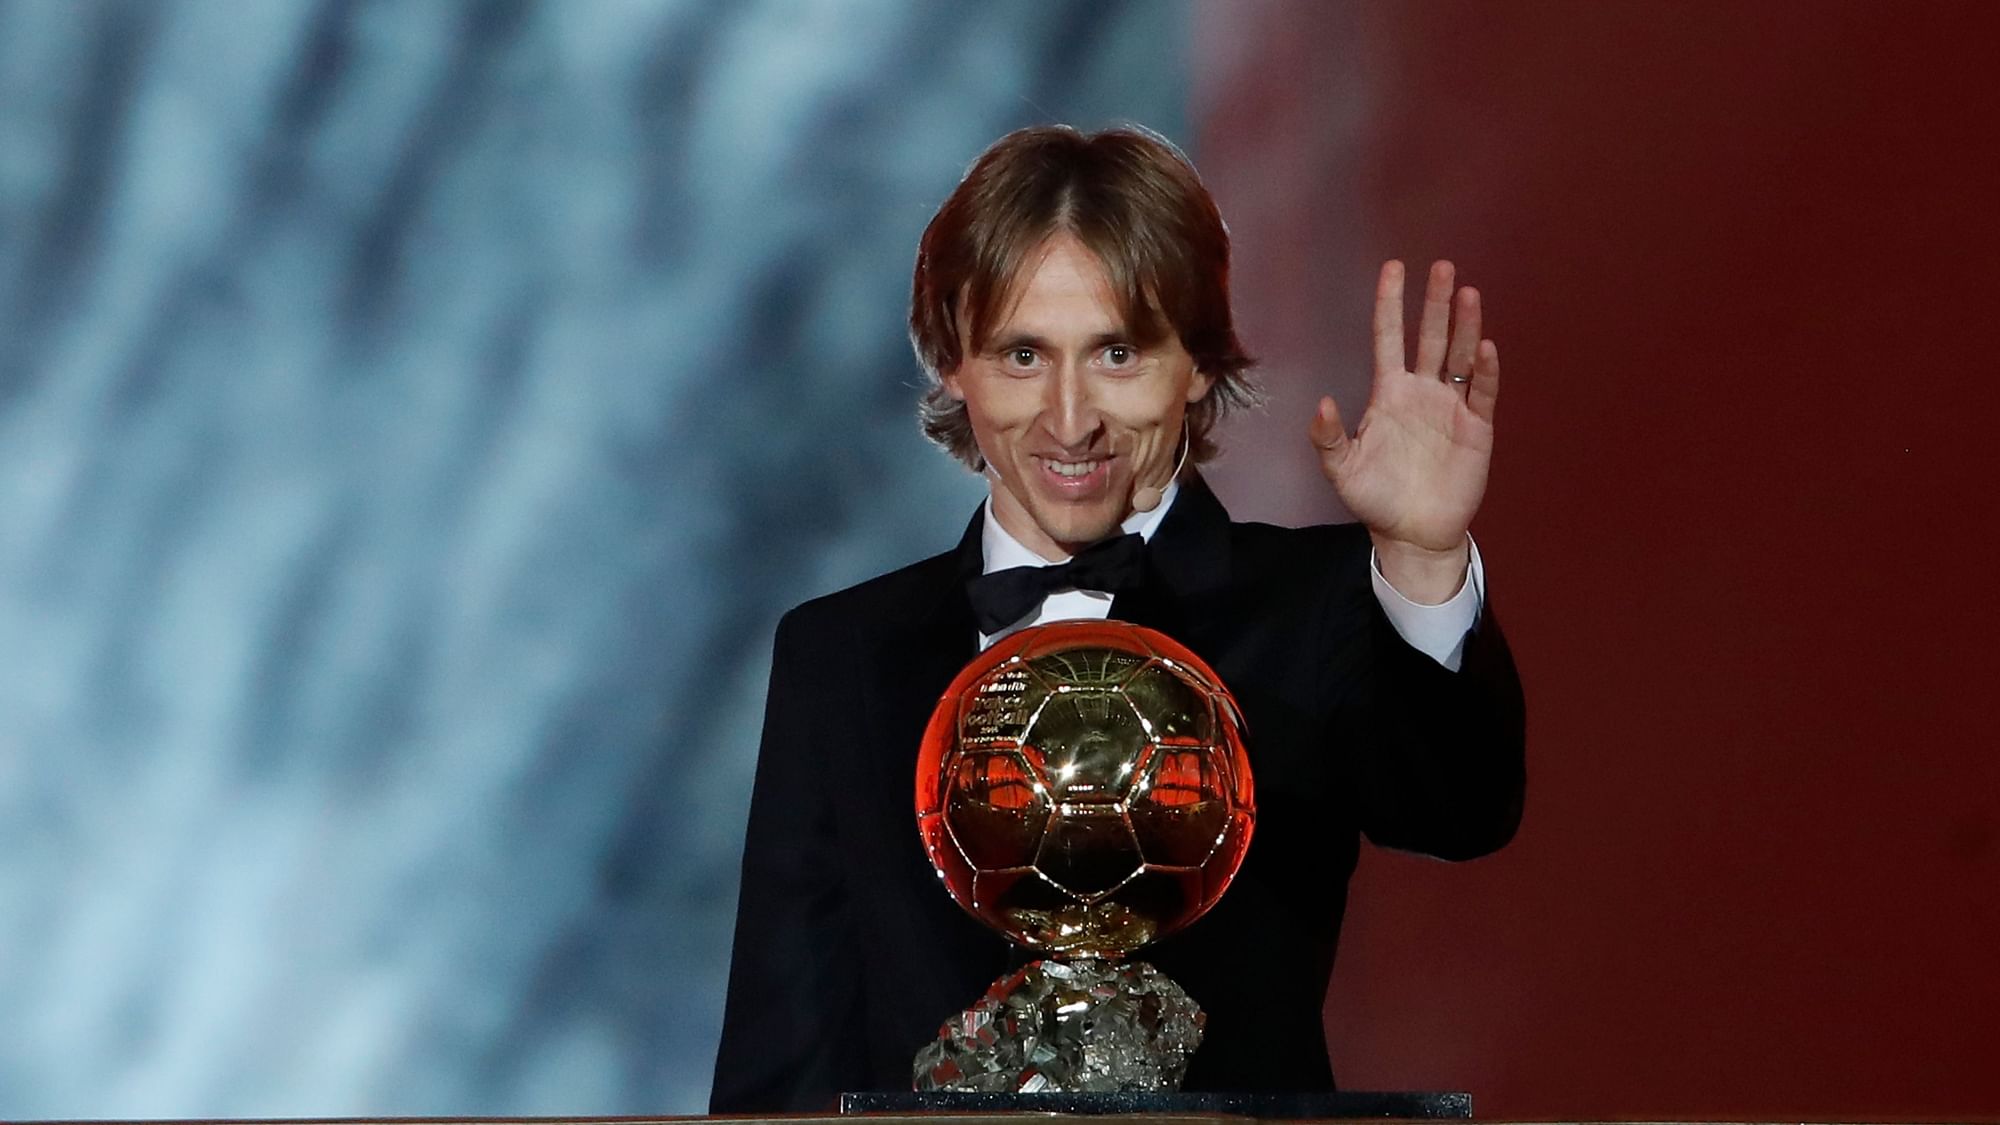 Luka Modric was announced as the winner of the prestigious prize in a glitzy ceremony held in Paris on Monday night.